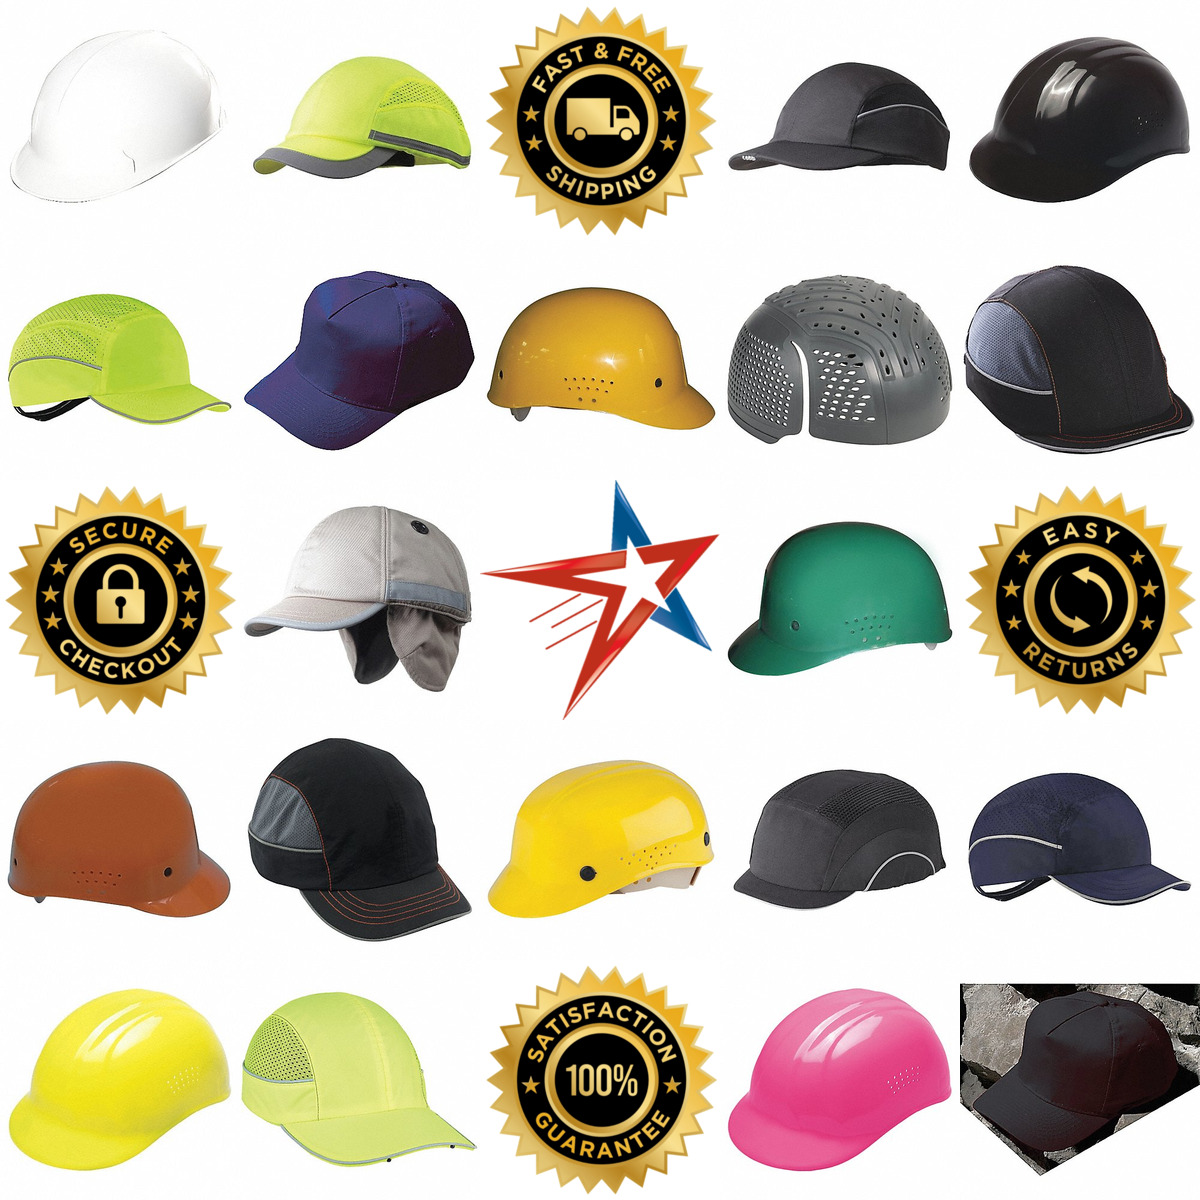 A selection of Bump Caps products on GoVets